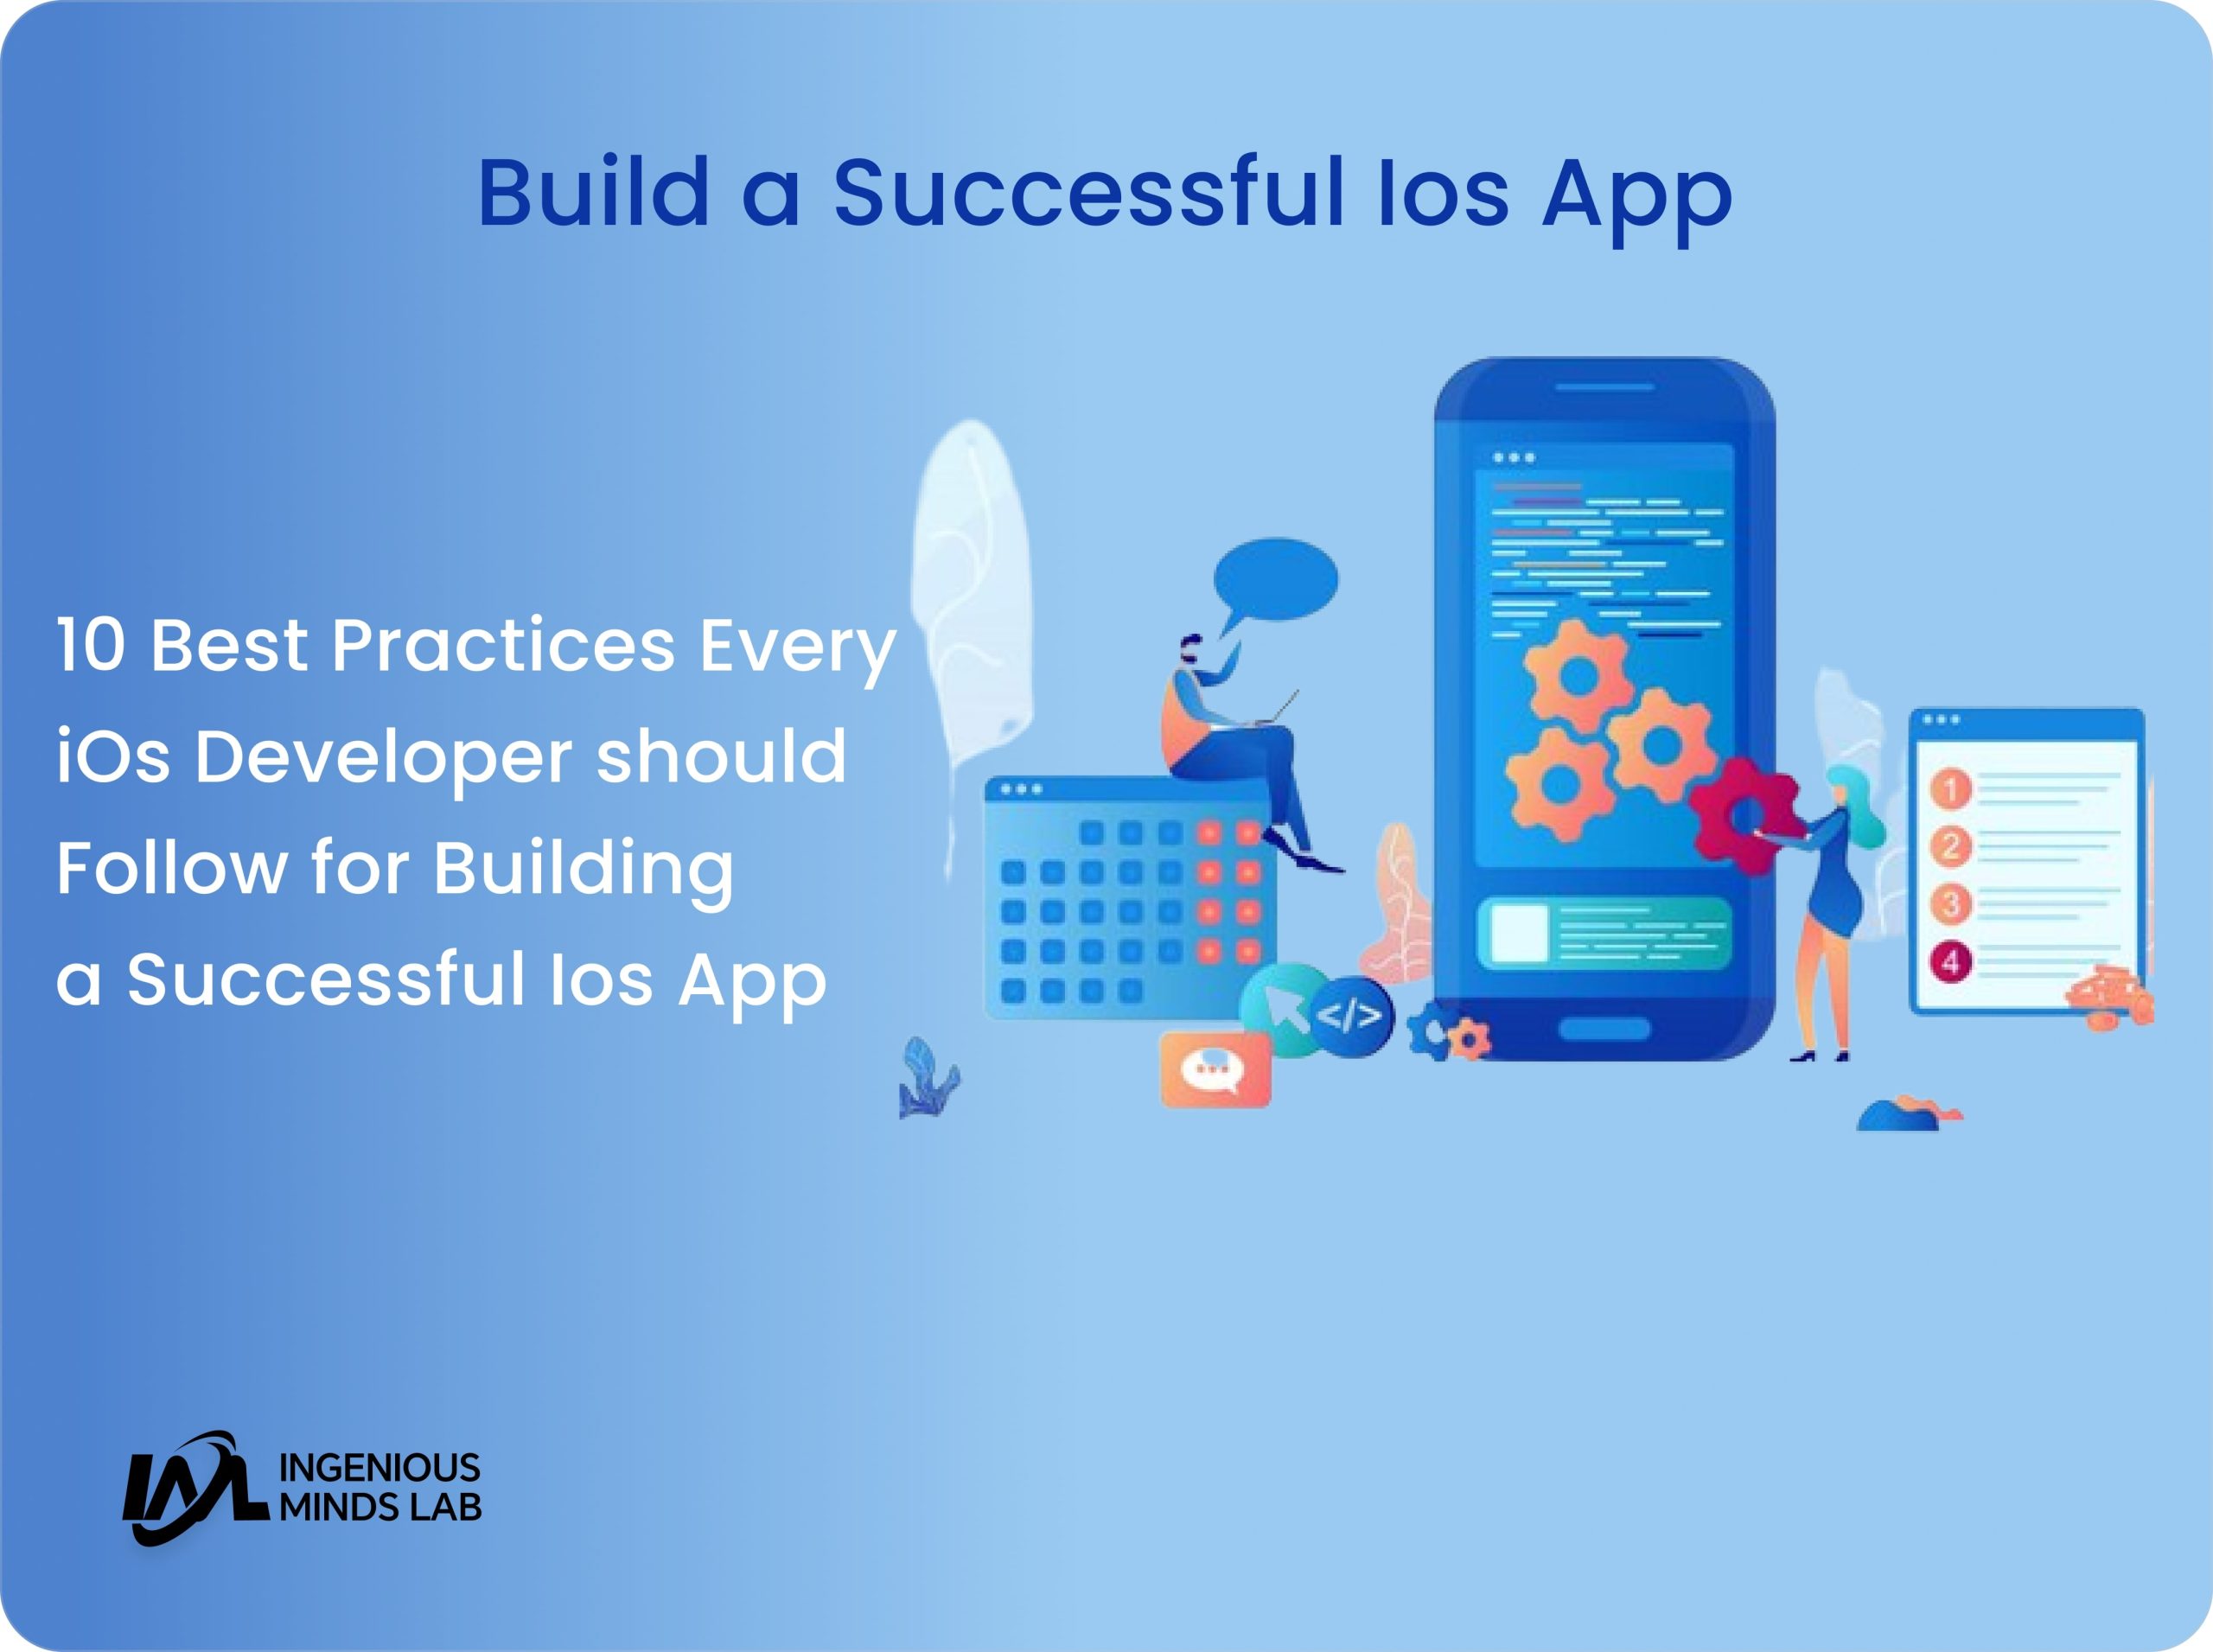 10 Best Practices Every iOS Developer Should Follow for Building a Successful iOS App